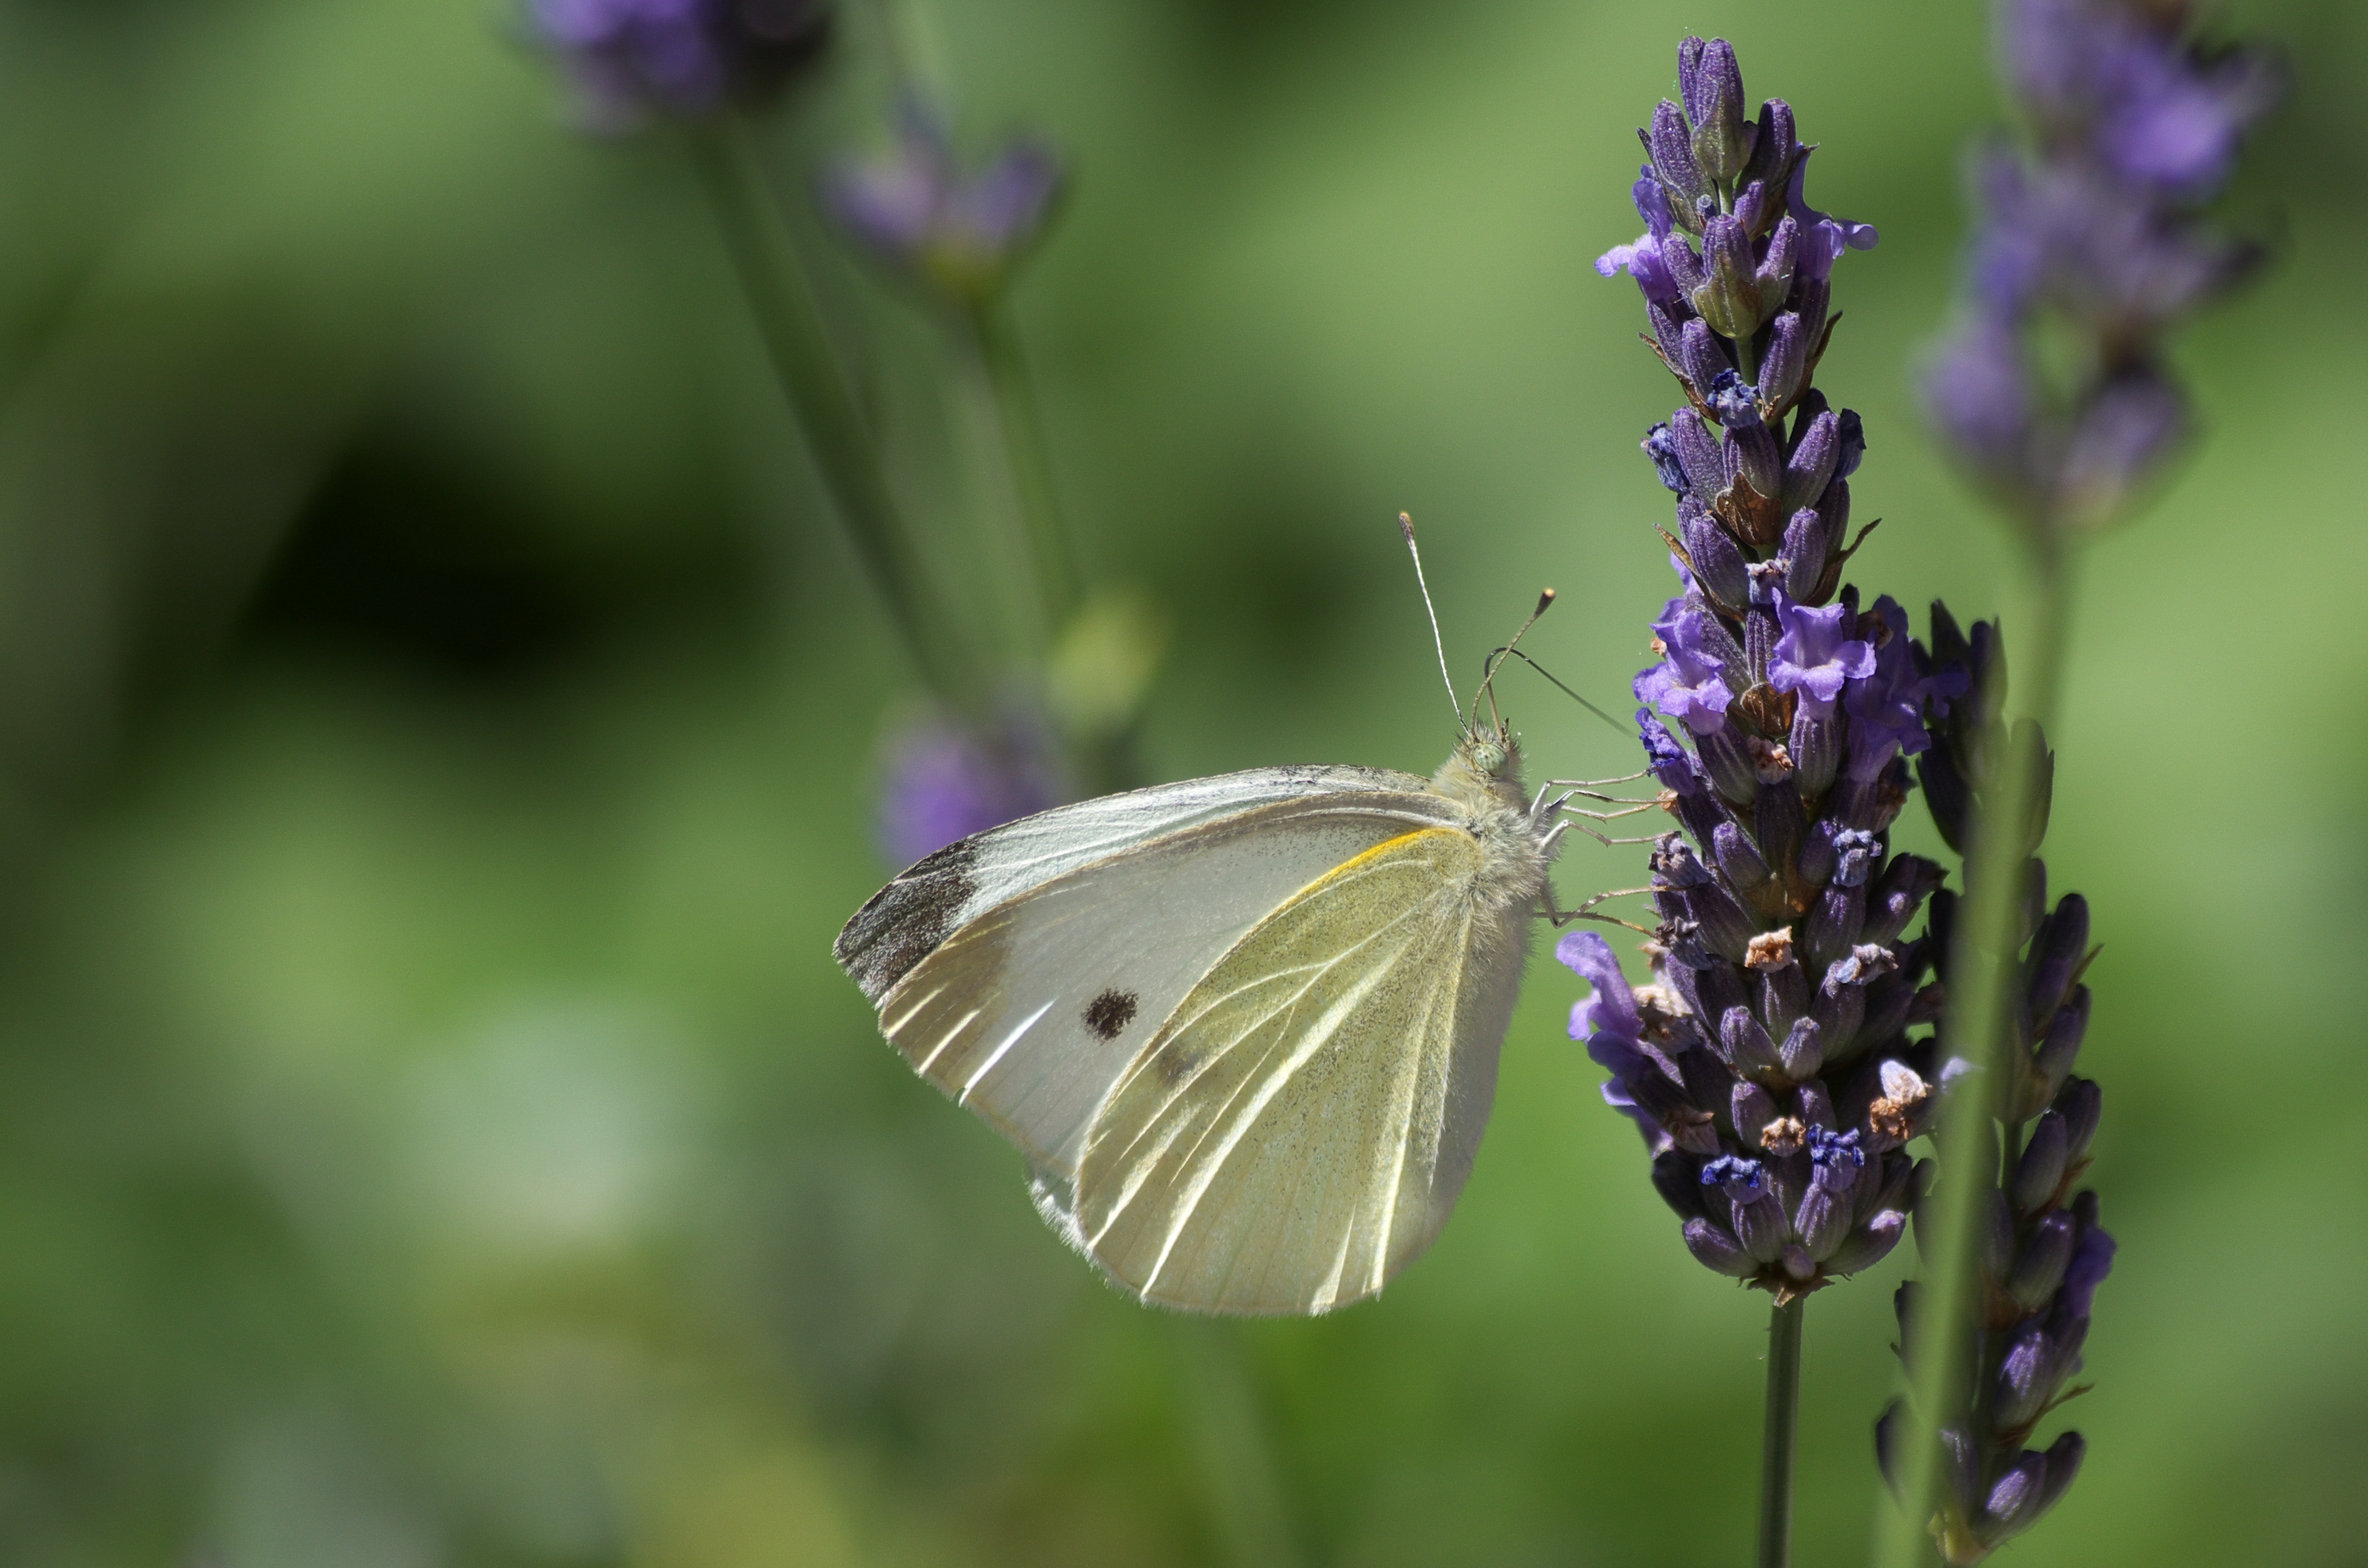 white and yellow butterfly perch in purple flower during daytime